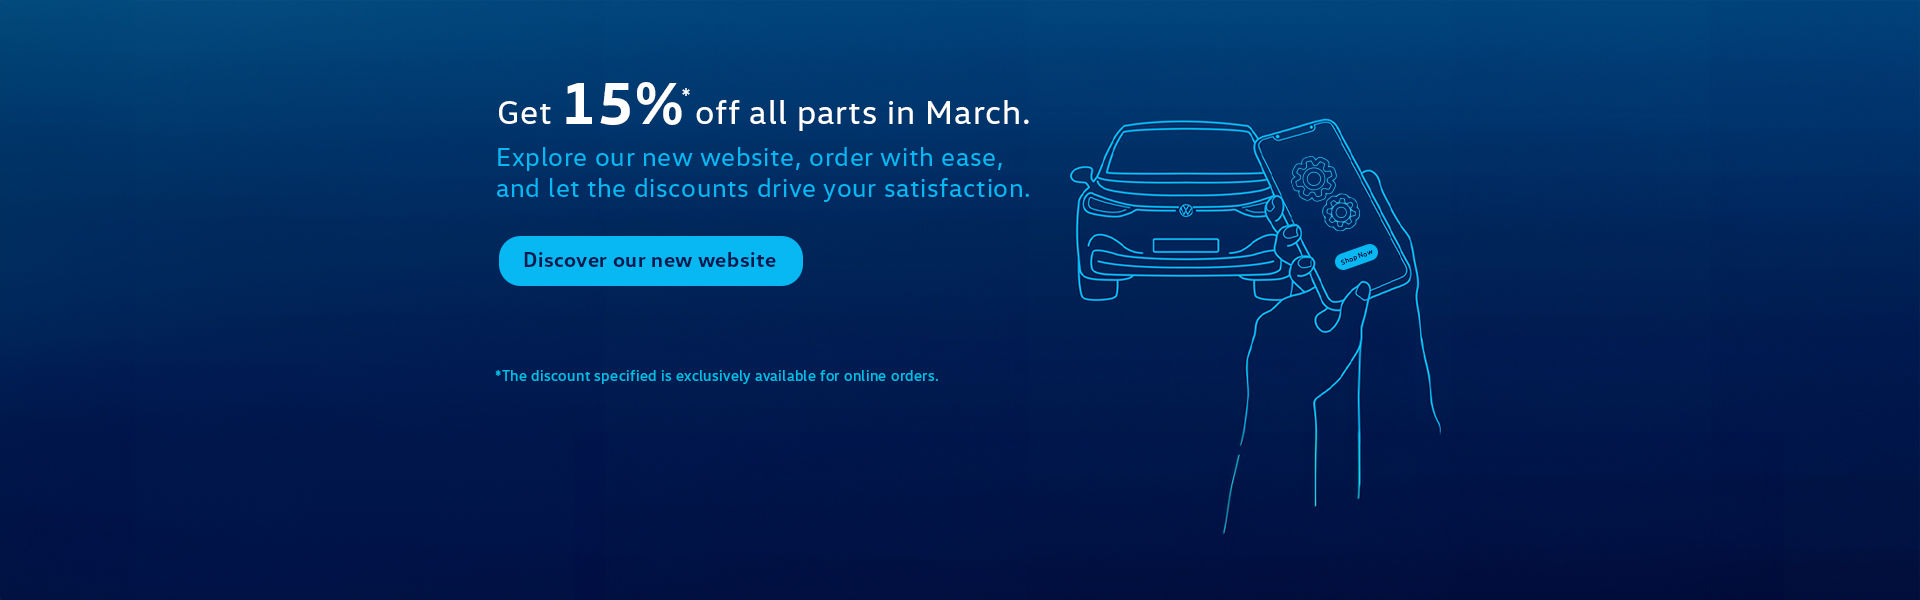 Get 15%* off all parts in March.